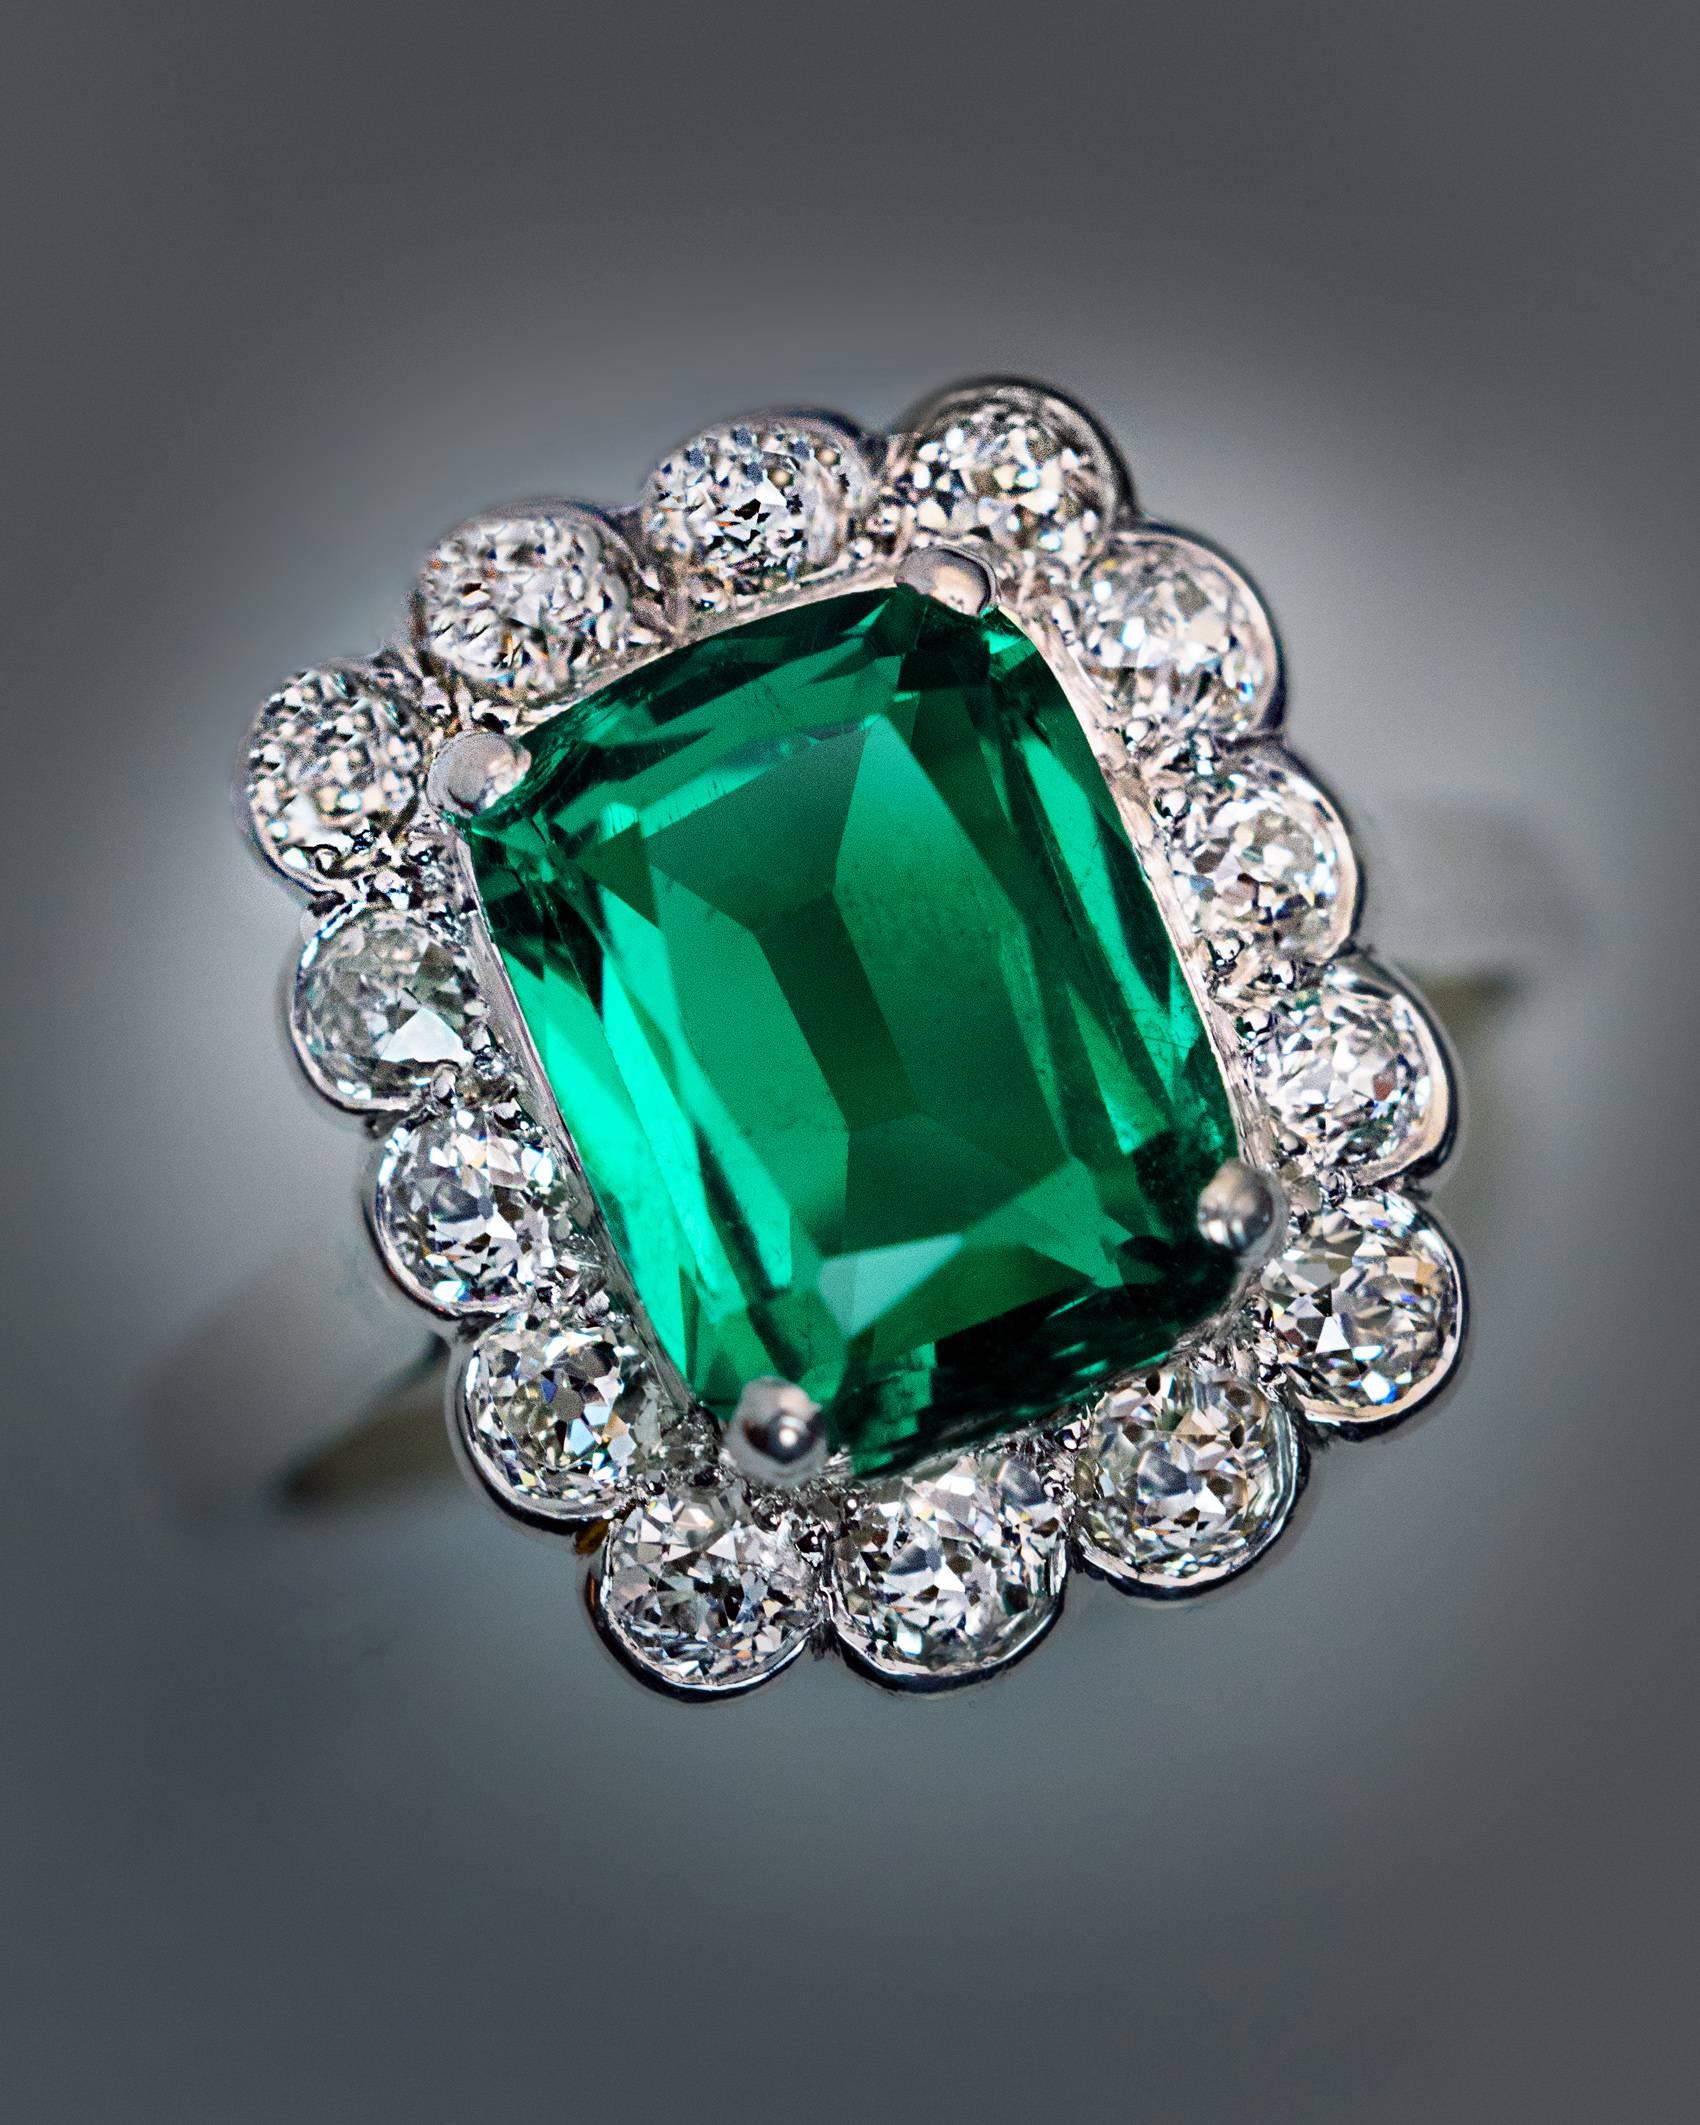 Circa 1925

This vintage French platinum (head) and 18K white gold (shank) engagement ring features a very rare untreated 2.31 ct Colombian emerald. The cushion cut emerald is extremely clean and full of life. The center stone is framed by chunky